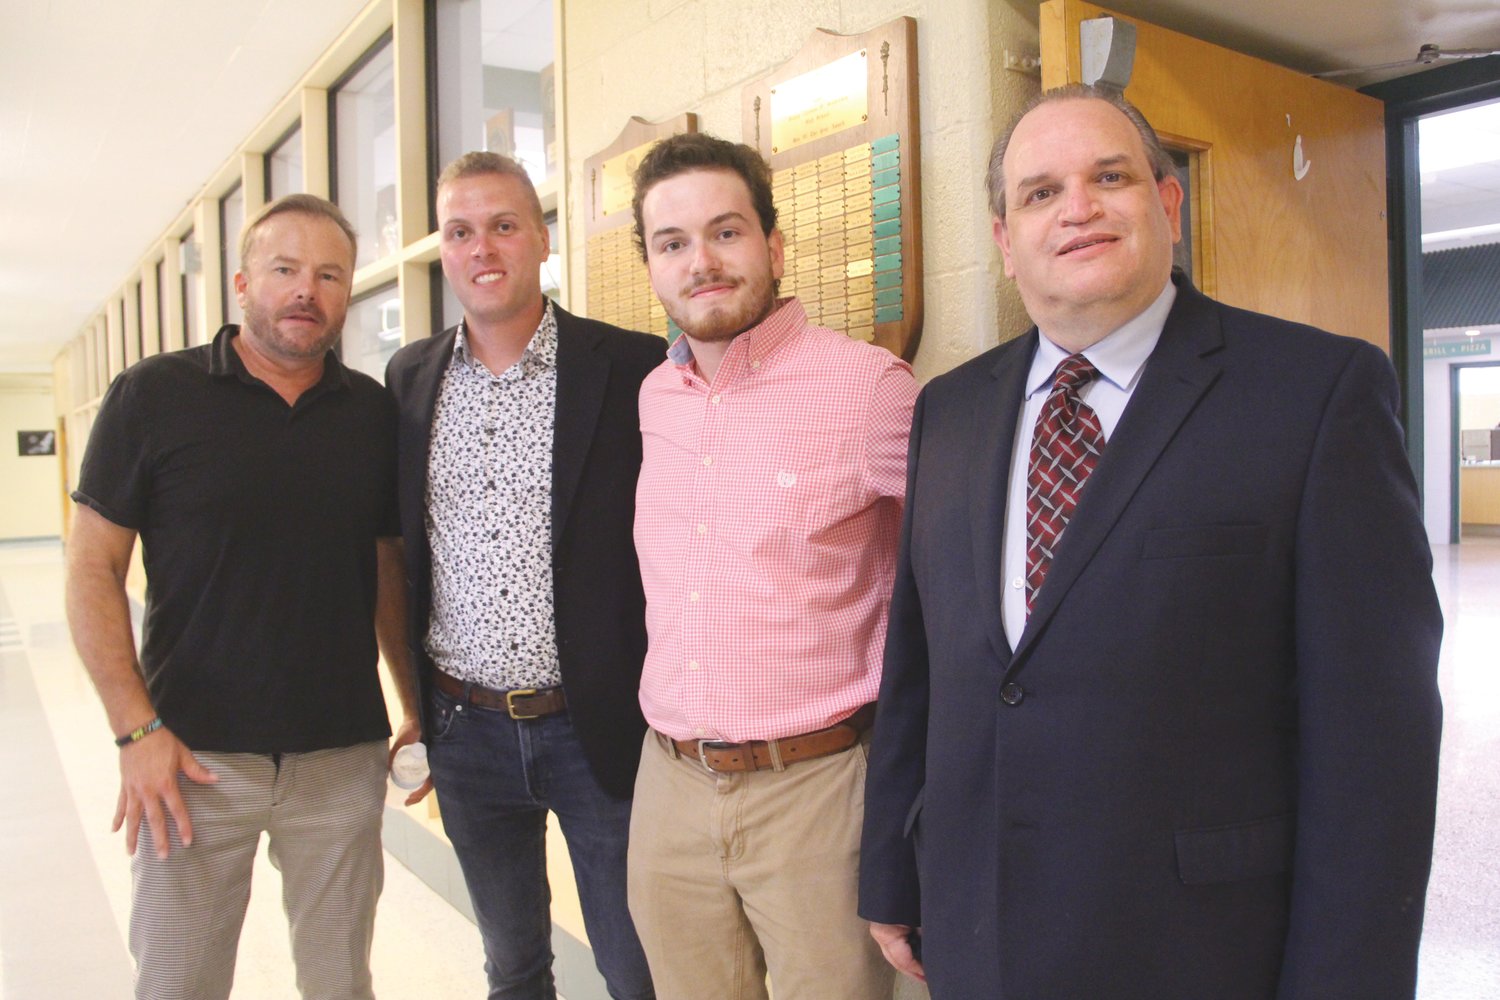 A LEGACY THAT LIVES ON:  Paul Bayne’s positive outlook on life and dedication to helping others was shared on Saturday at the world premiere of “Living With the Odds.” From left are Eric Meltvedt, Ryan Bayne, Luke Bayne, and Paul’s brother Richard.